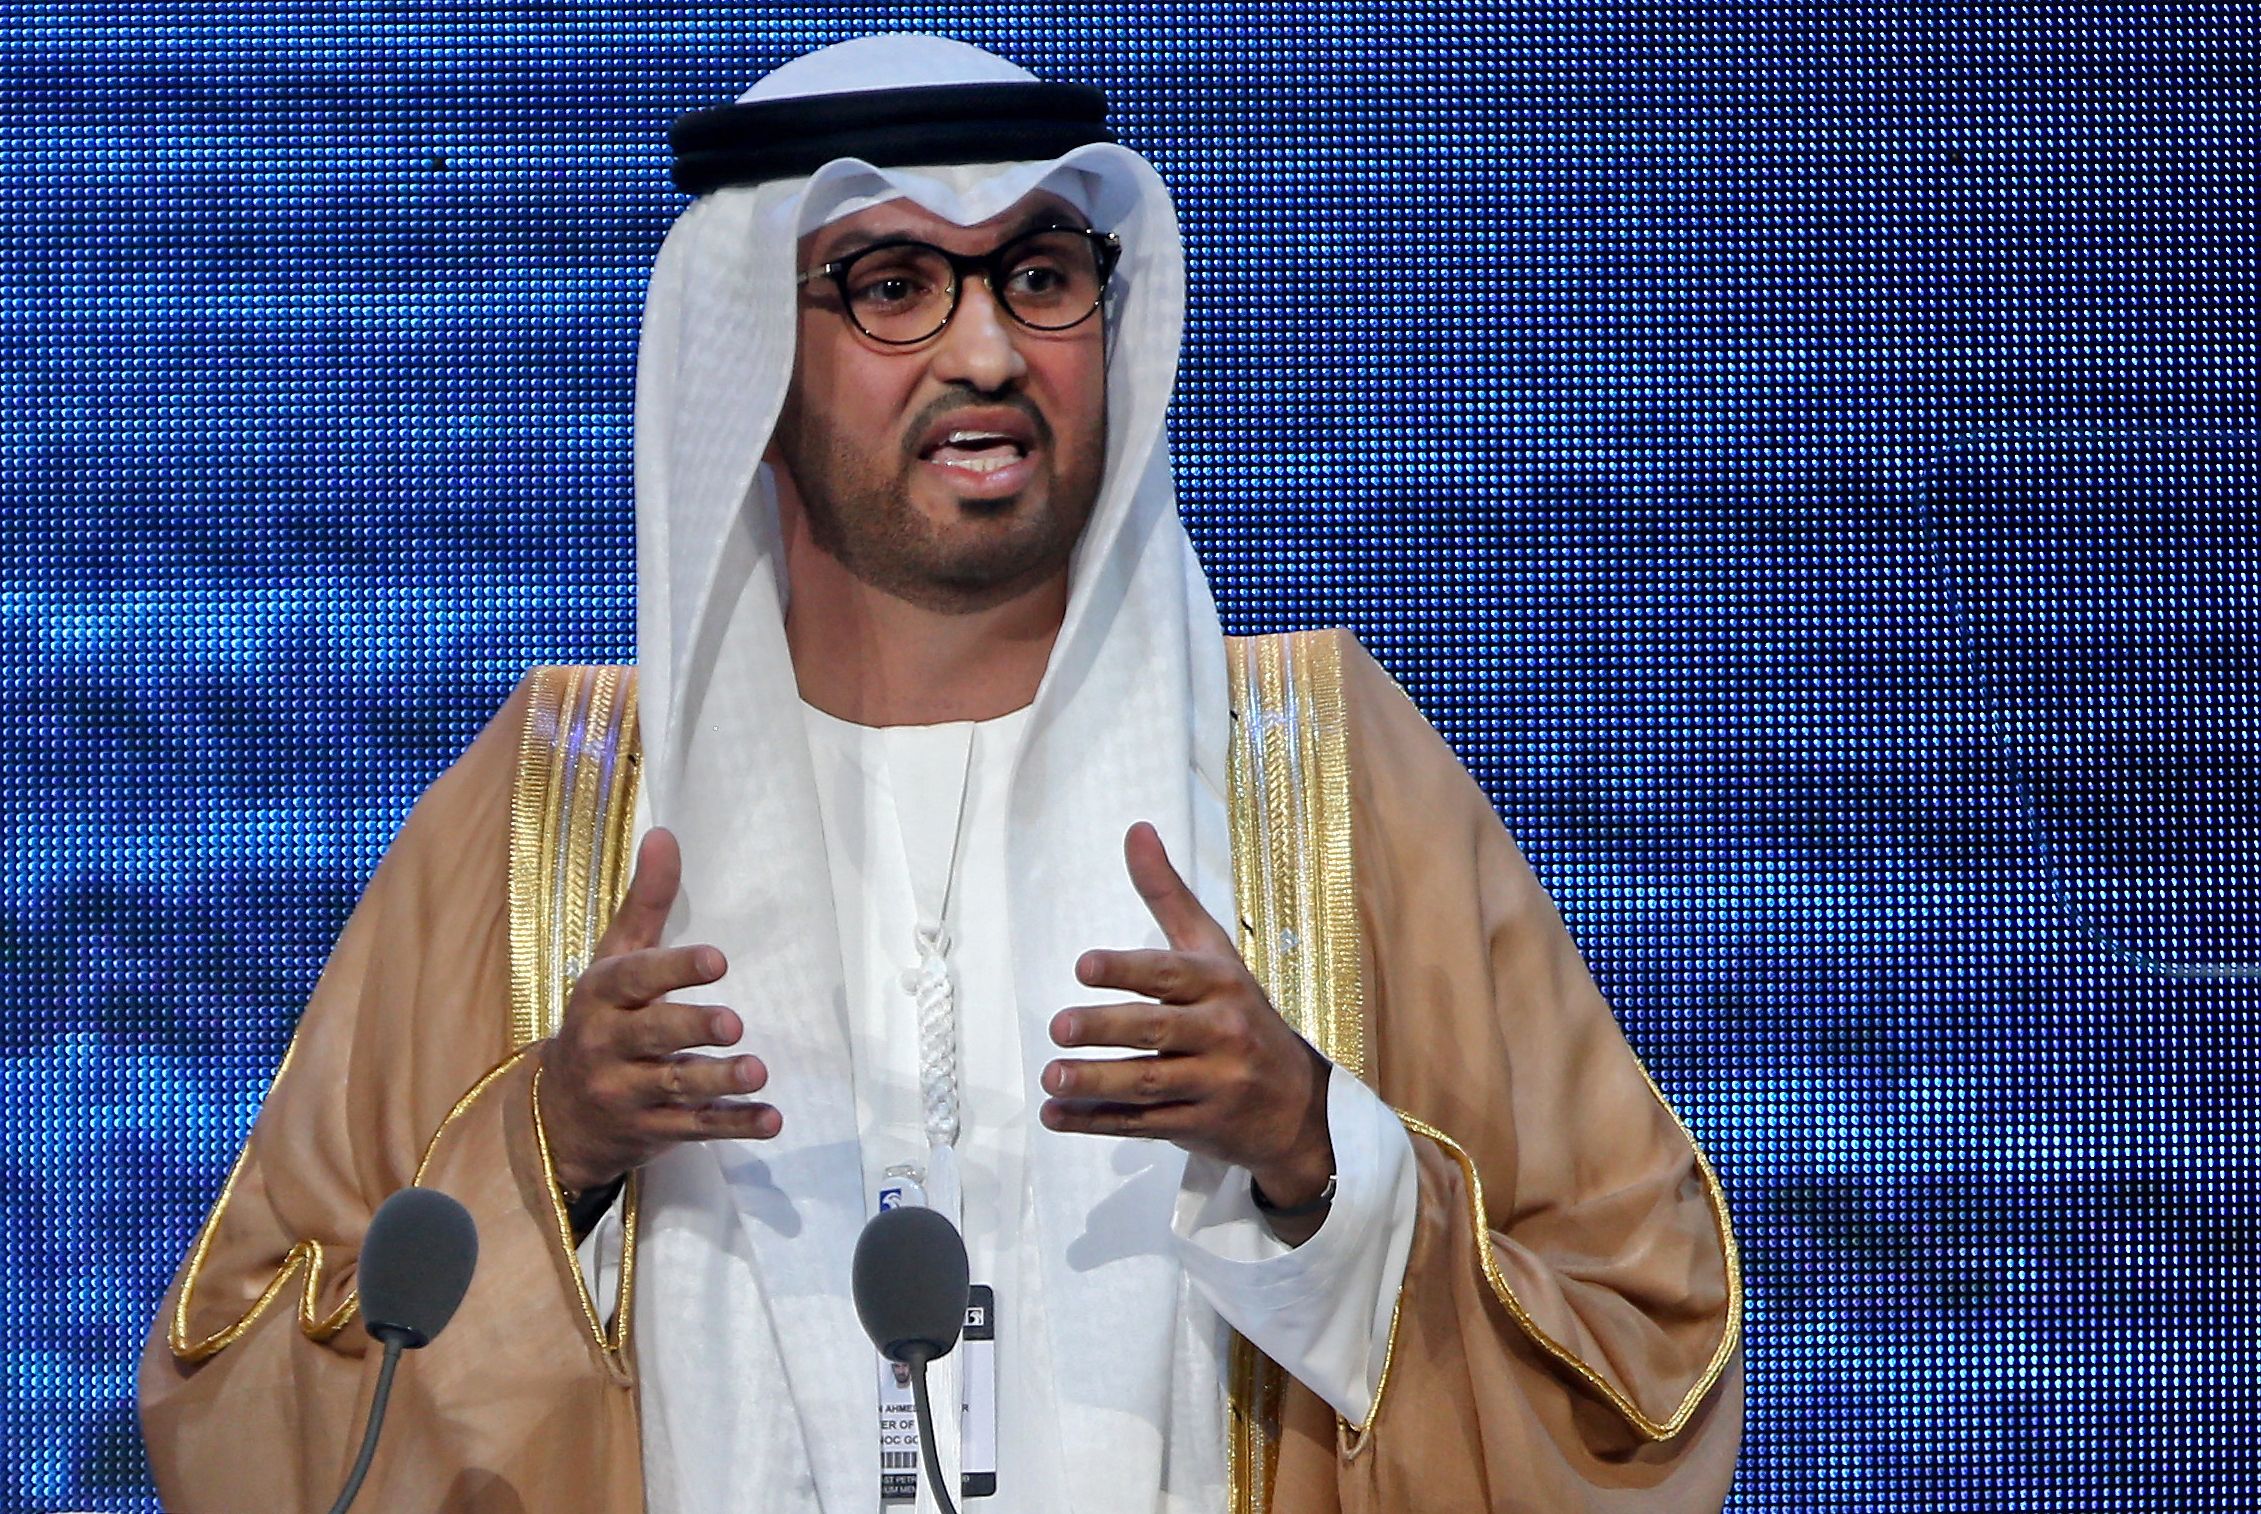 PHOTO: The United Arab Emirates' minister of state and CEO of the Abu Dhabi National Oil Company (ADNOC), Sultan Ahmed al-Jaber, addresses the opening ceremony of the Abu Dhabi International Petroleum Exhibition and Conference (ADIPEC), Nov. 11, 2019.